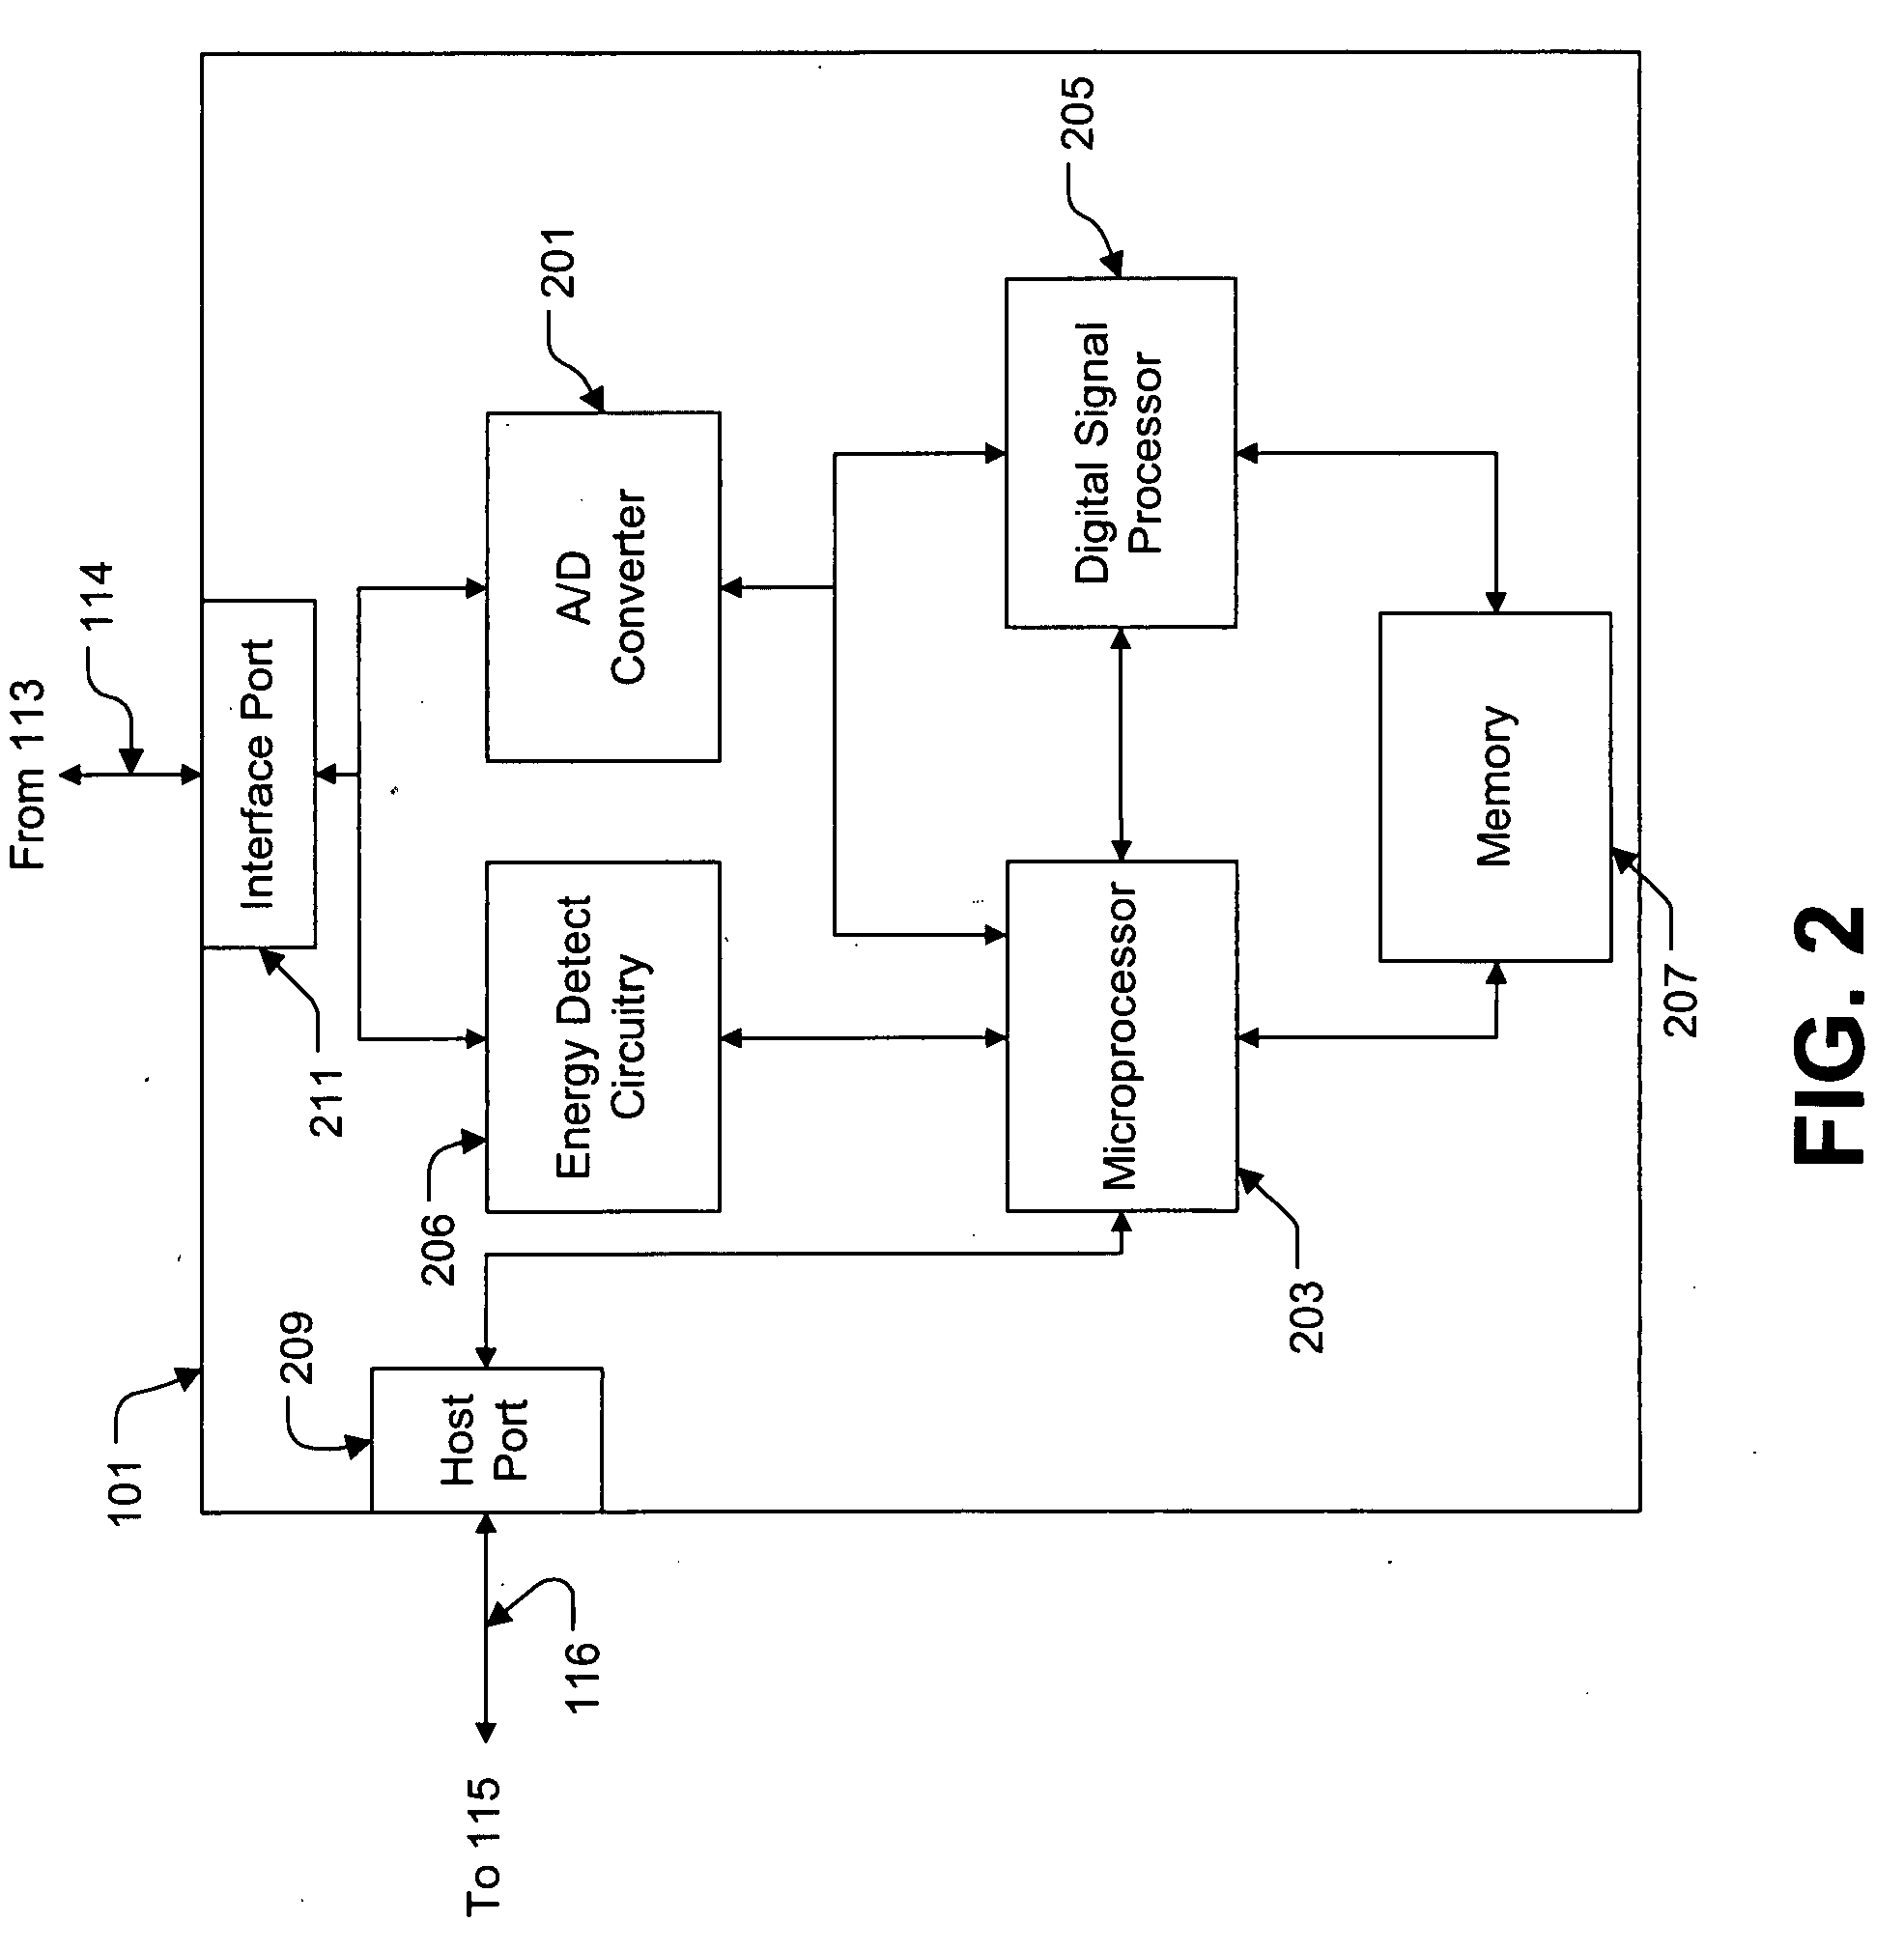 System and method for dectecting three-way attempts